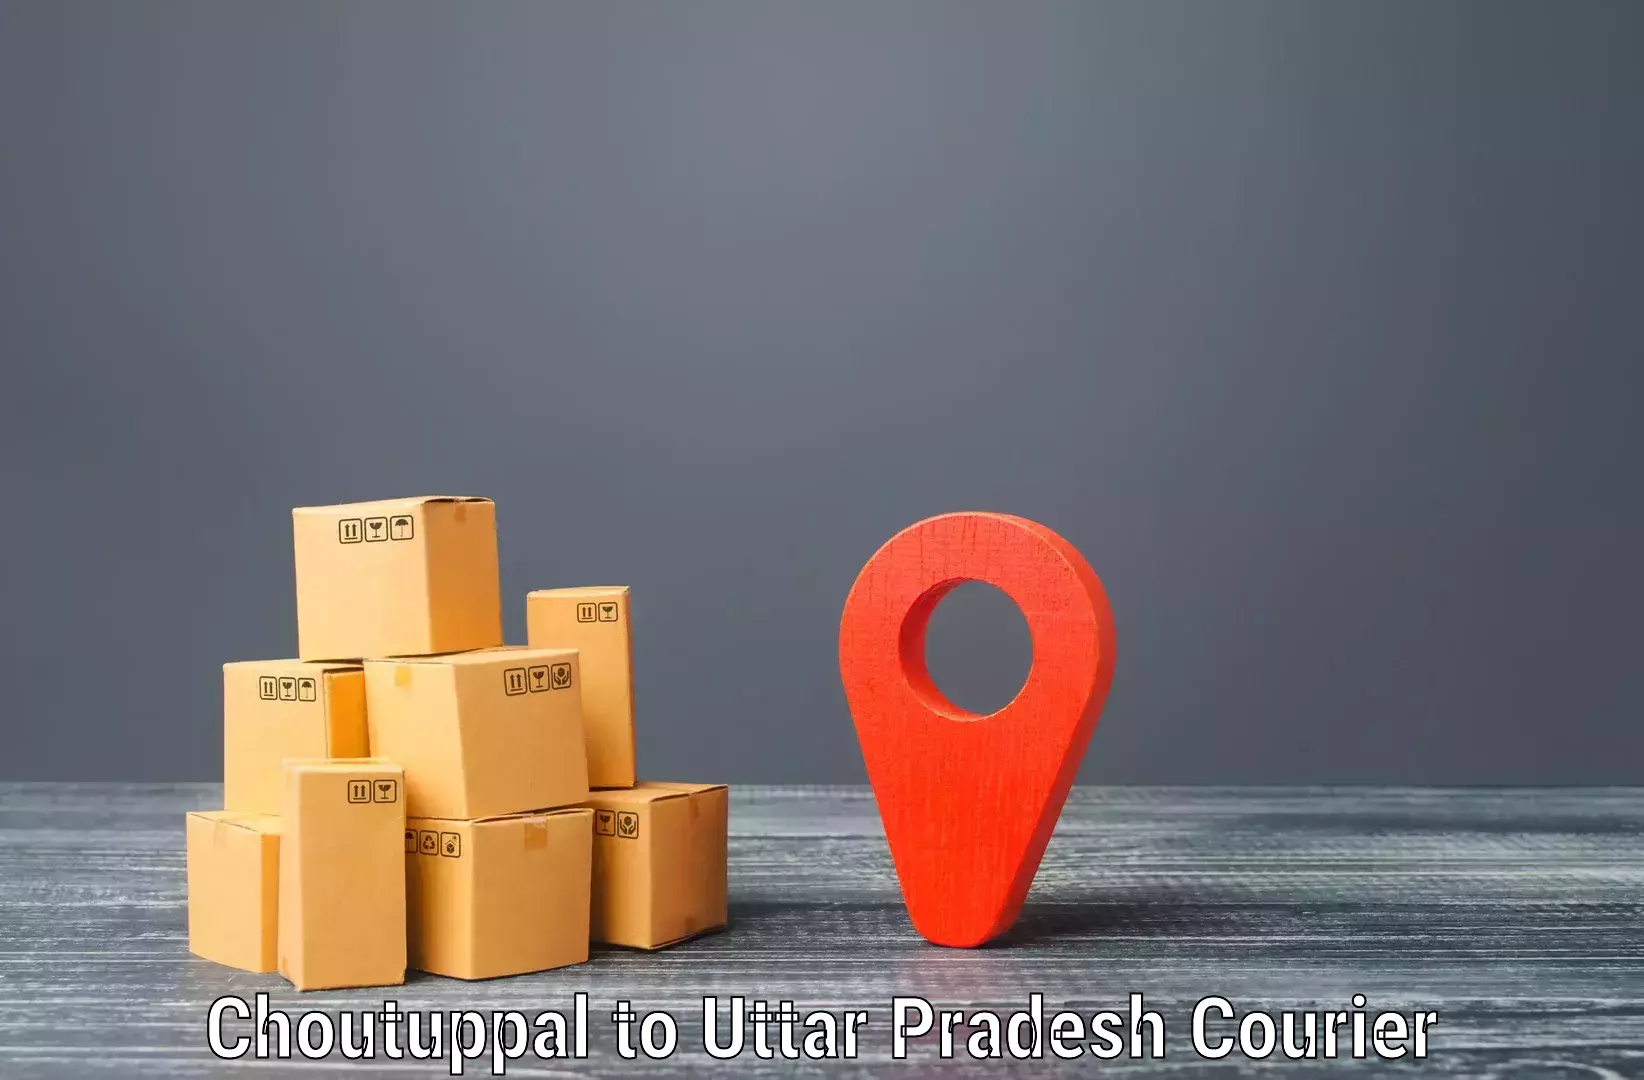 Next-day delivery options Choutuppal to IIT Kanpur